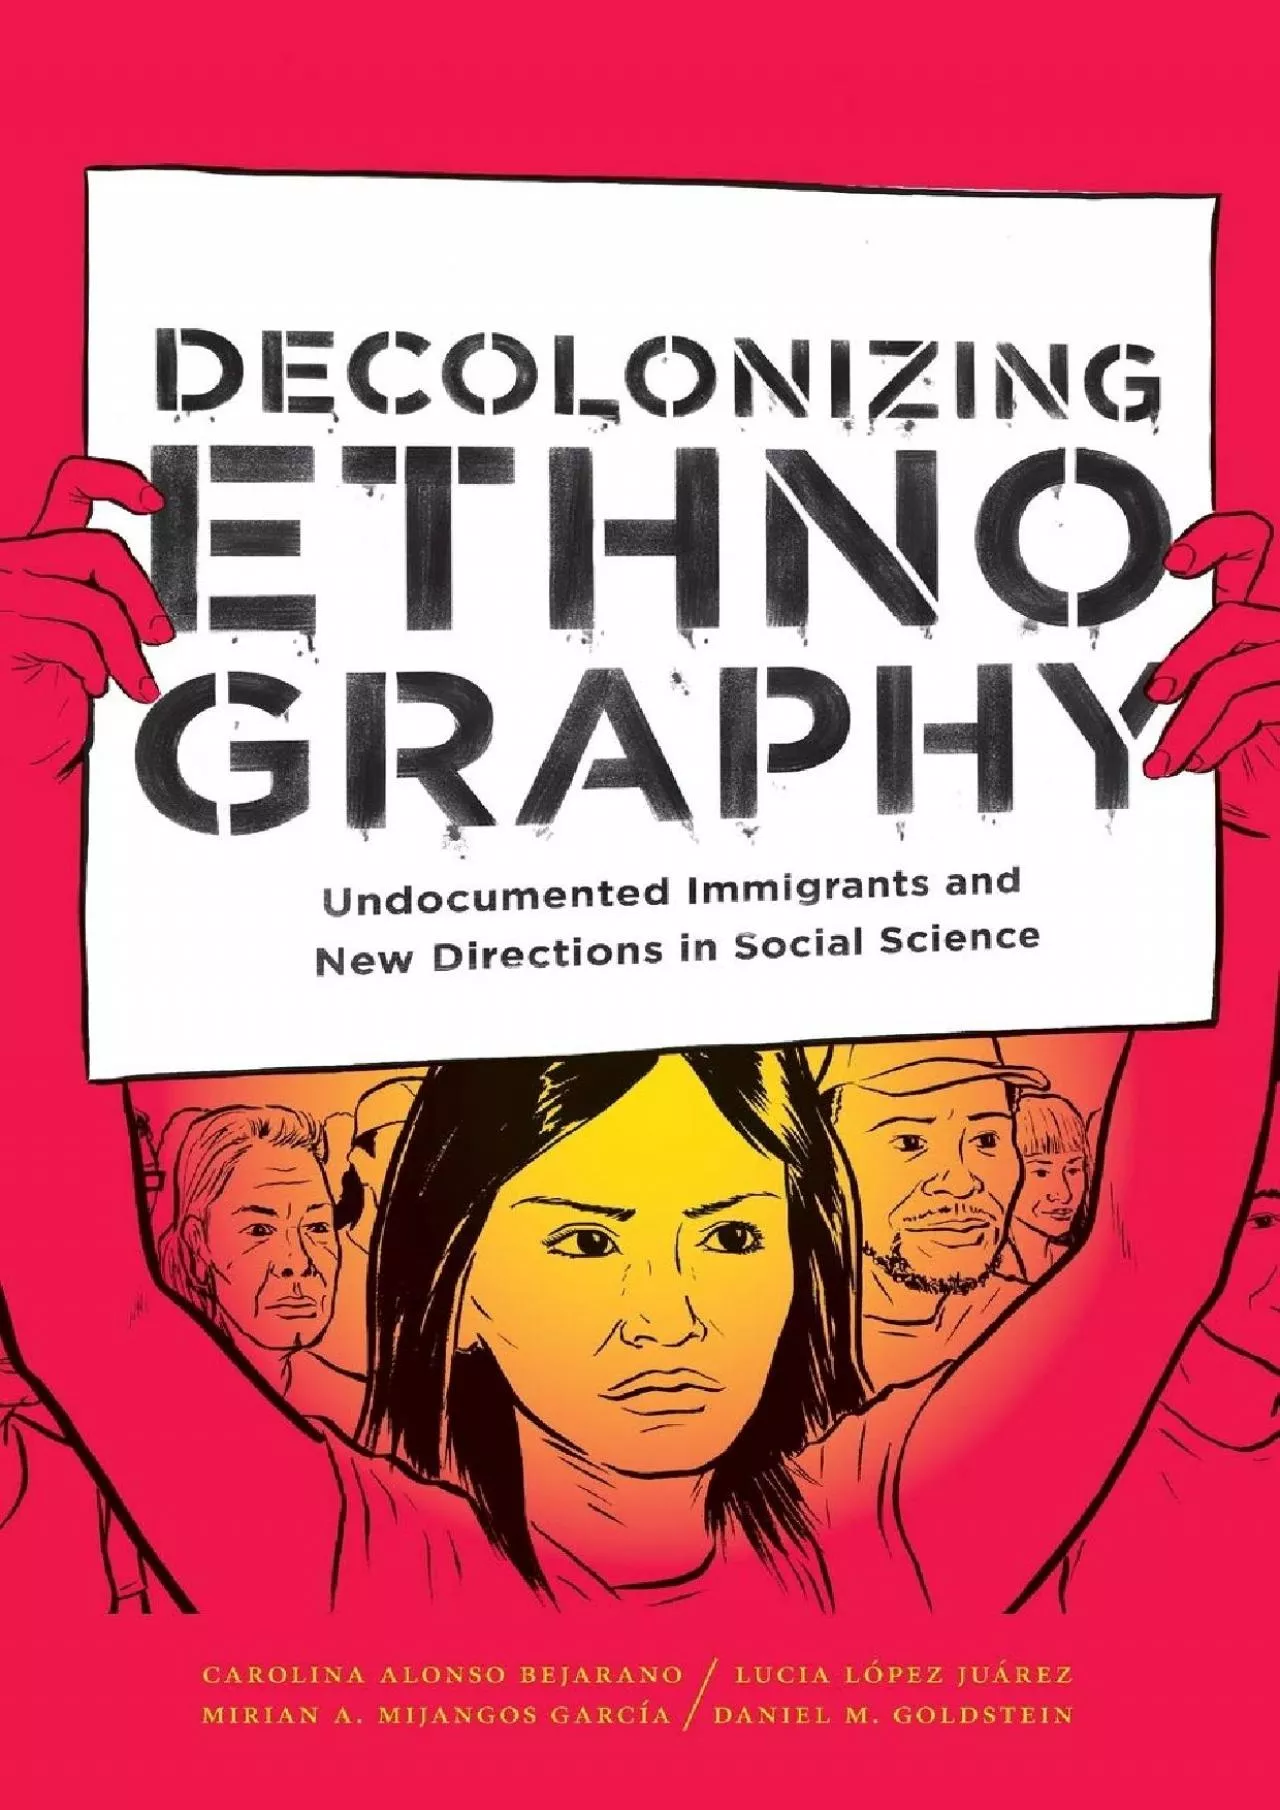 (BOOK)-Decolonizing Ethnography: Undocumented Immigrants and New Directions in Social